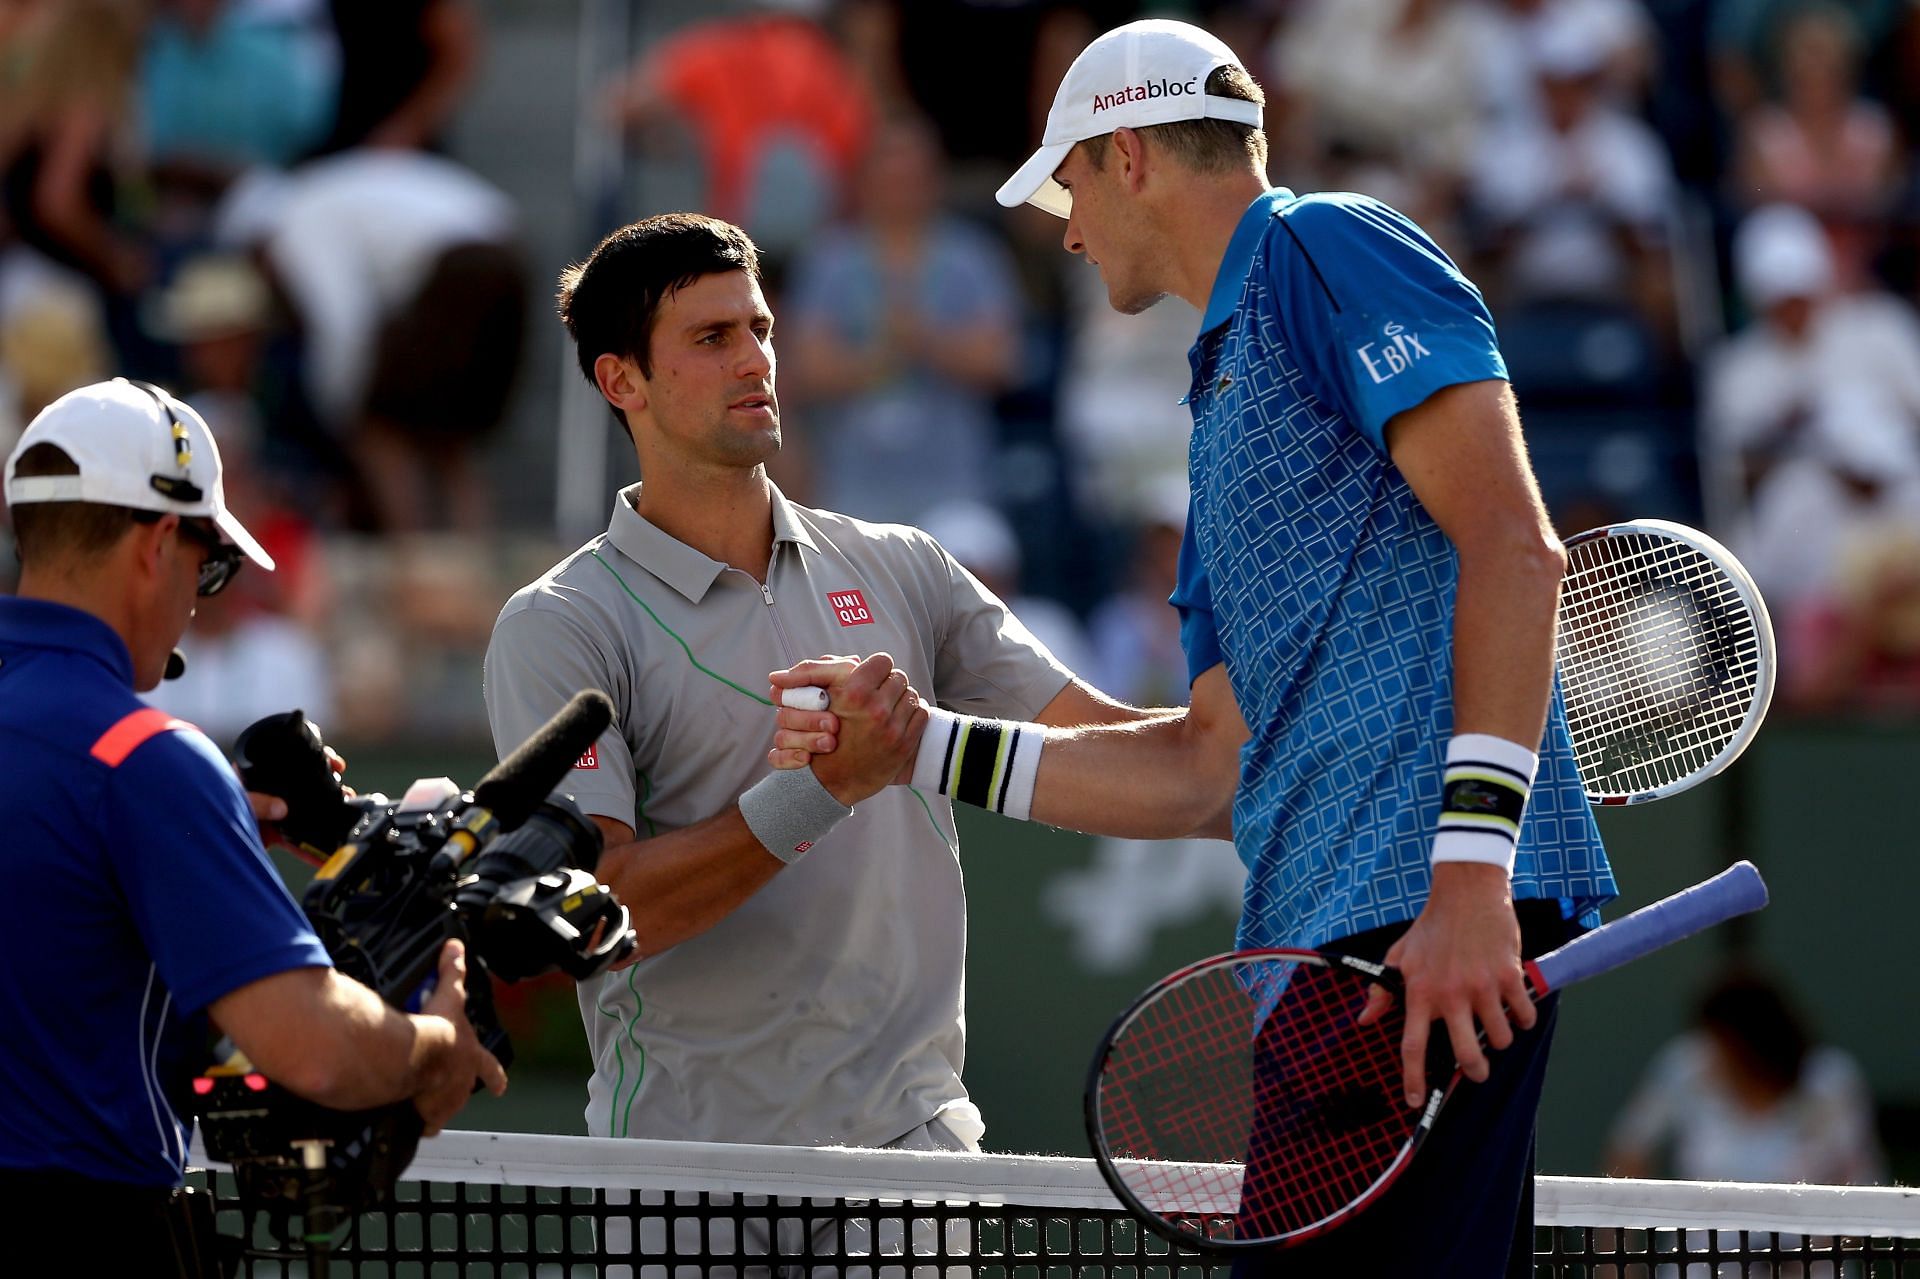 John Isner has come out in support of Novak Djokovic